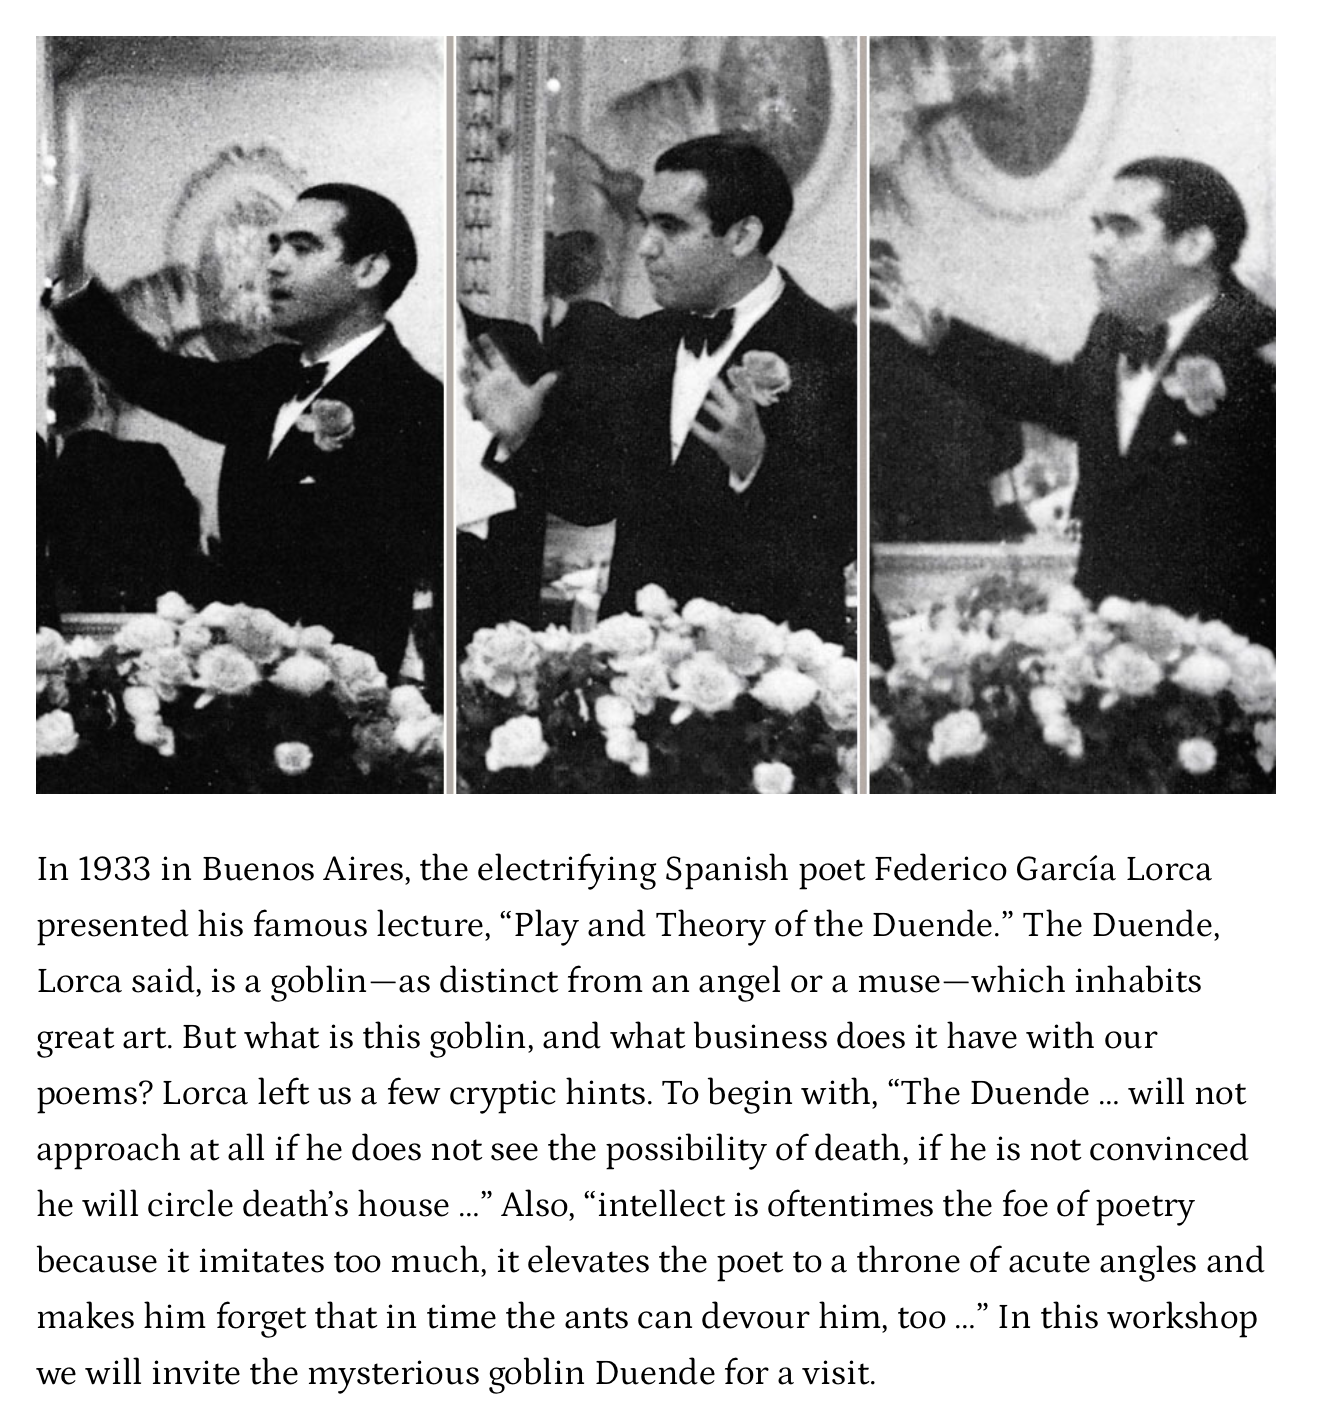 Images of the poet Lorca delivering a lecture on duende.